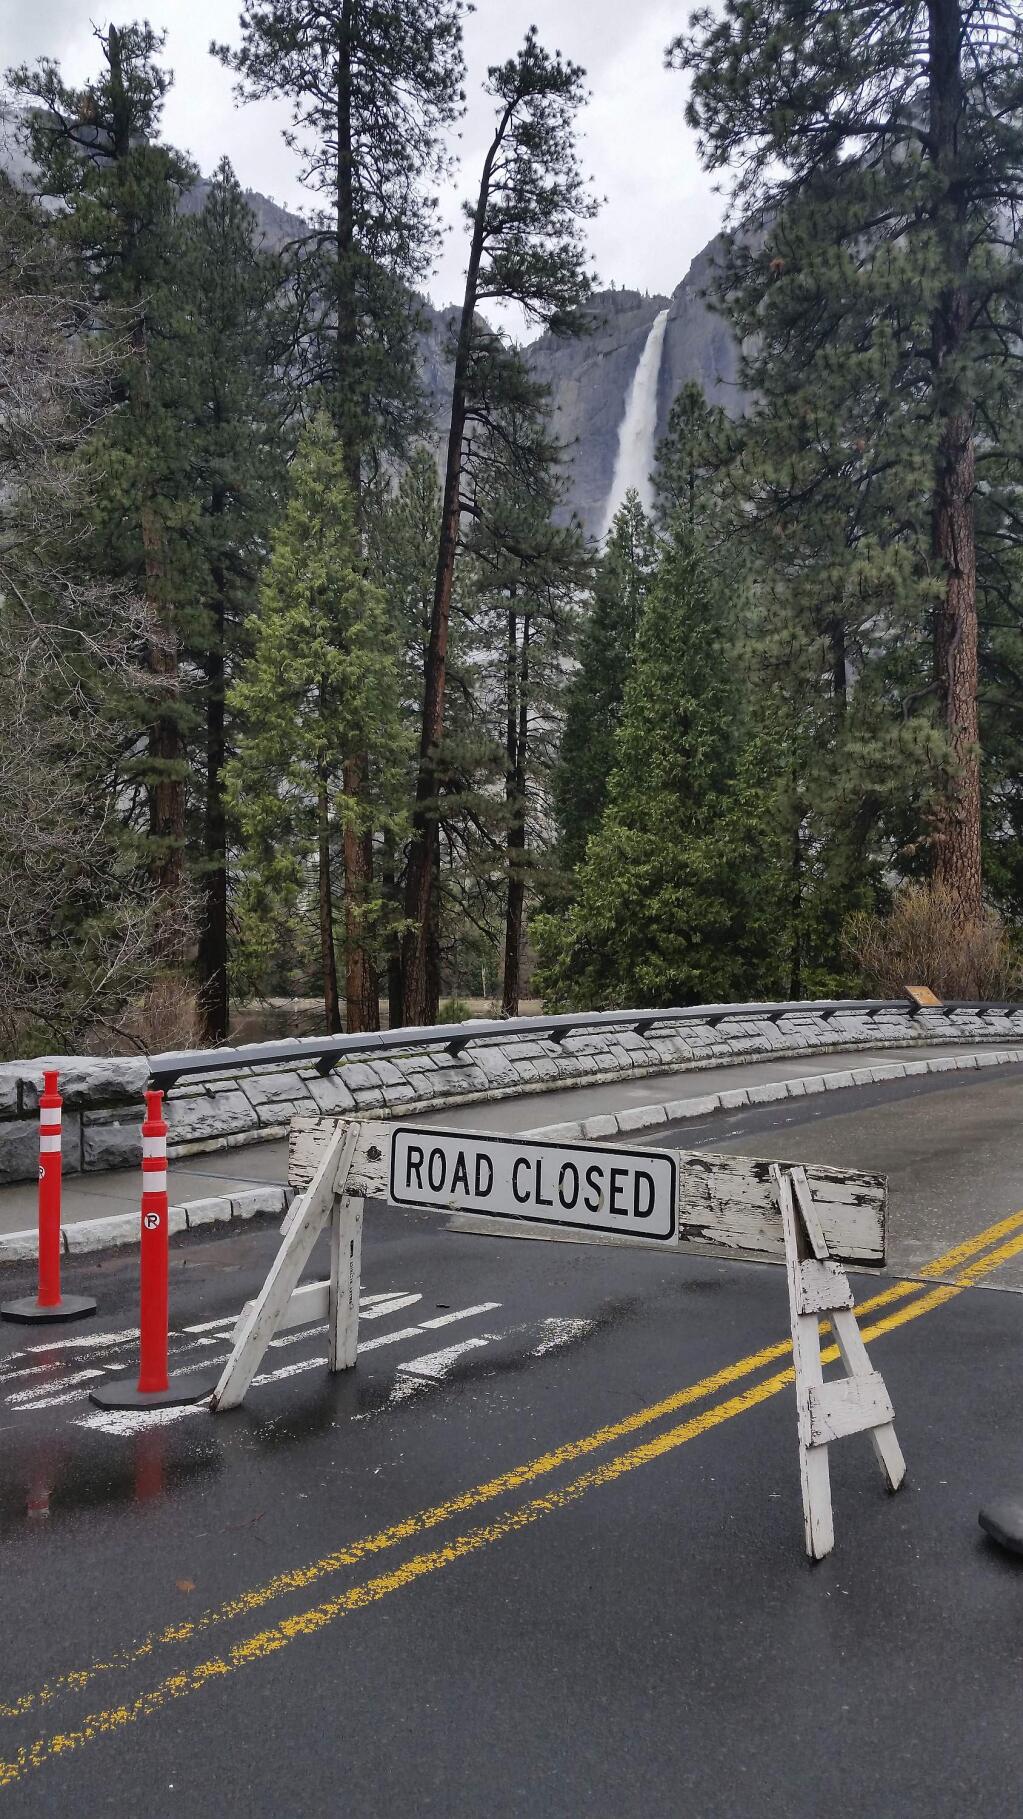 In this Saturday, April 7, 2018, photo released by the National Park Service, roads in Yosemite Valley have been impacted by high water in Yosemite, Calif. Sections of Northside Drive, Southside Drive, and Sentinel Drive remain closed due to high water in the roadway. Parts of Yosemite National Park remained closed as the Merced River peaked several feet above flood stage through the Yosemite Valley. (National Park Service via AP)